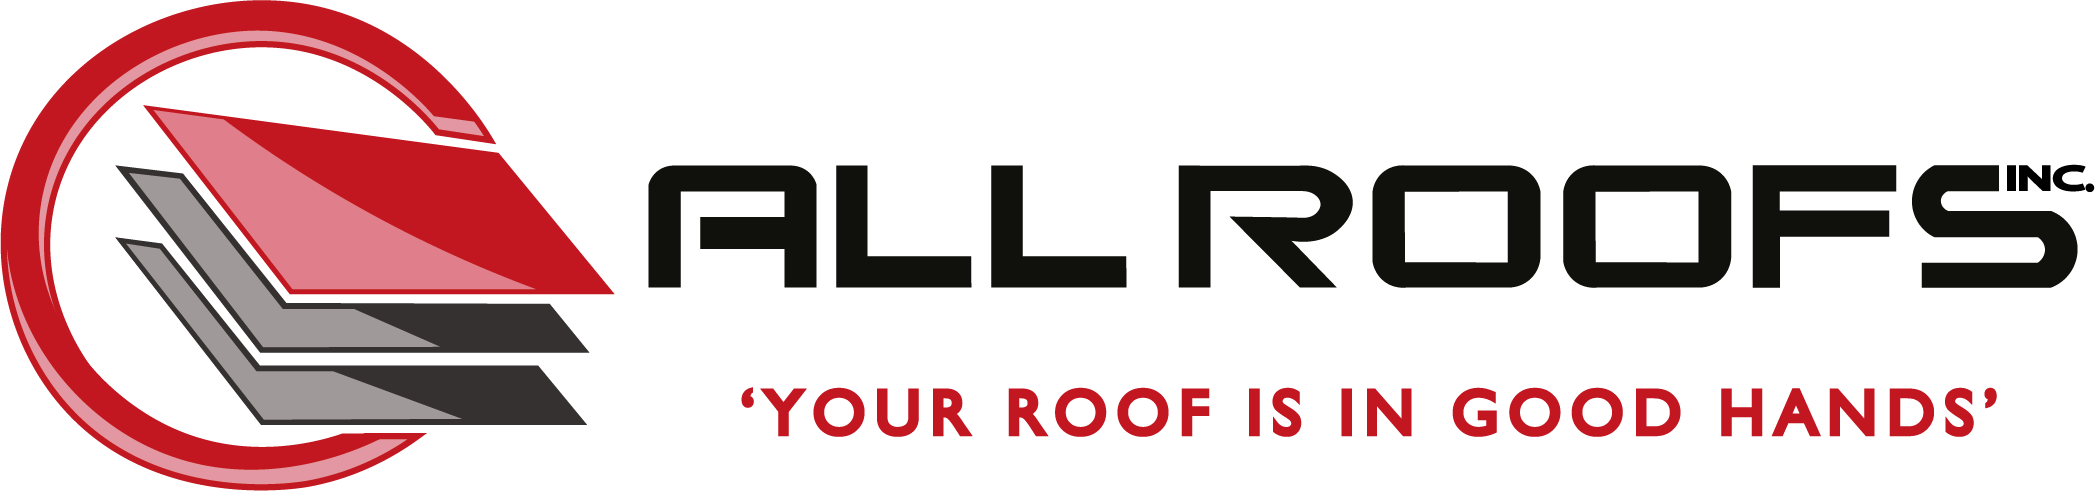 Allroof Roofing Company Franklin Park & Other Suburbs | Roof Repair & Roof Replacement